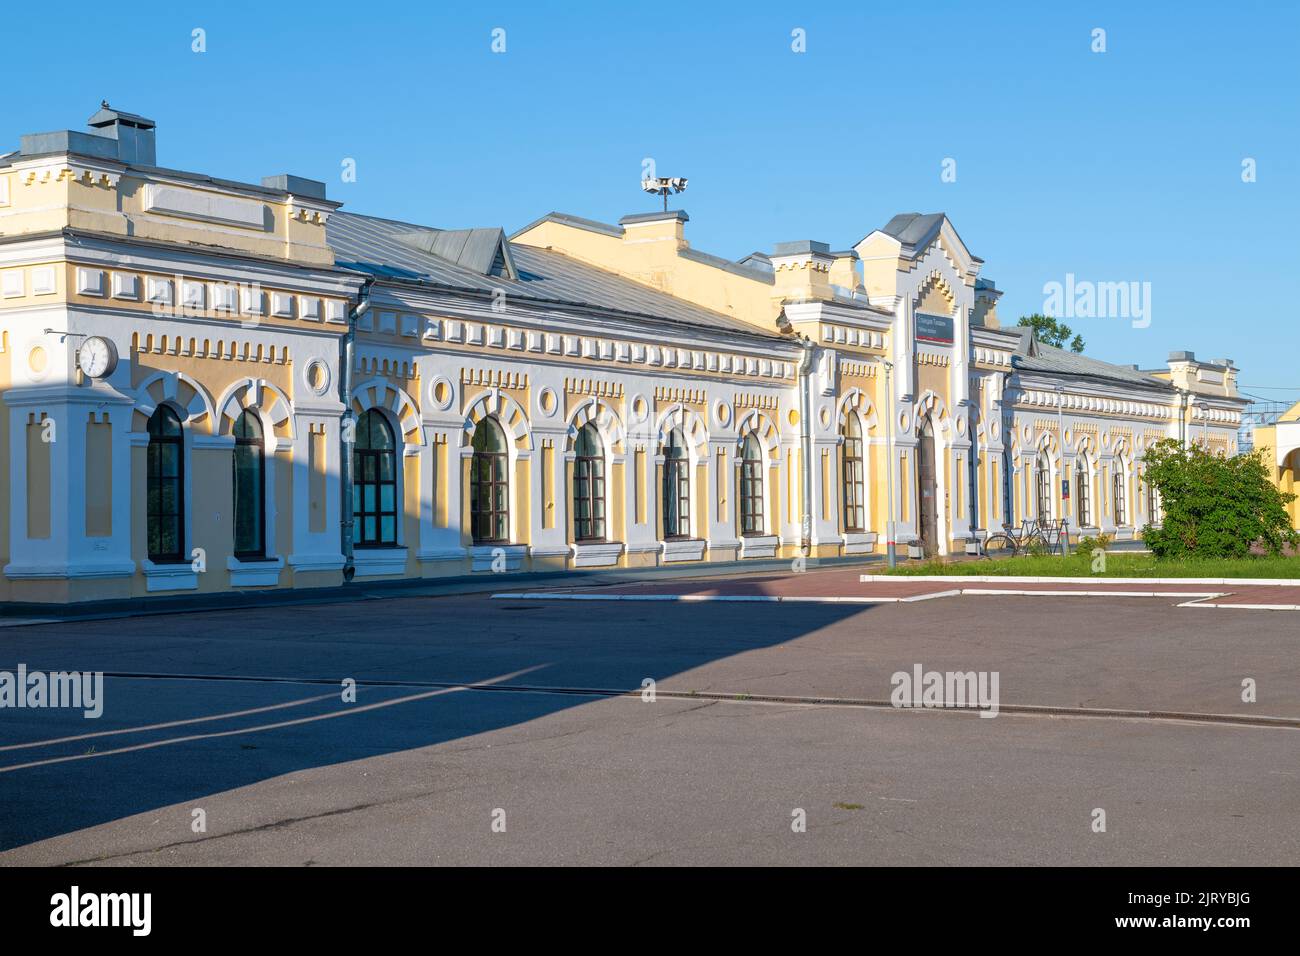 TIKHVIN, RUSSIA - AUGUST 04, 2022: The old building of the railway station on a sunny August morning Stock Photo